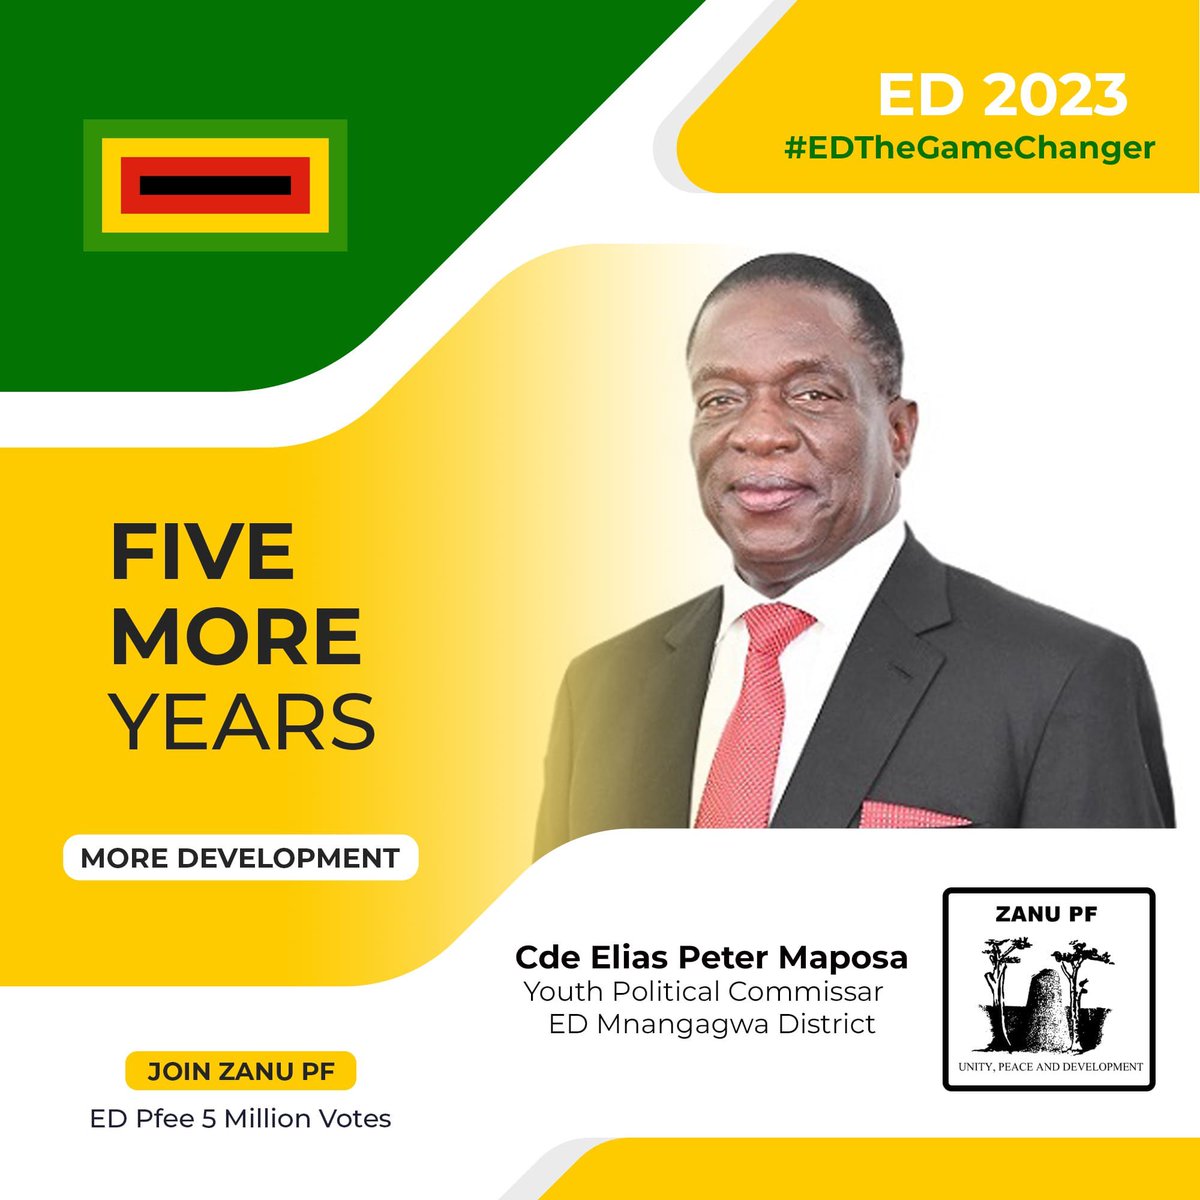 5 more years for development. Cde ED our 2023 presidential candidate.